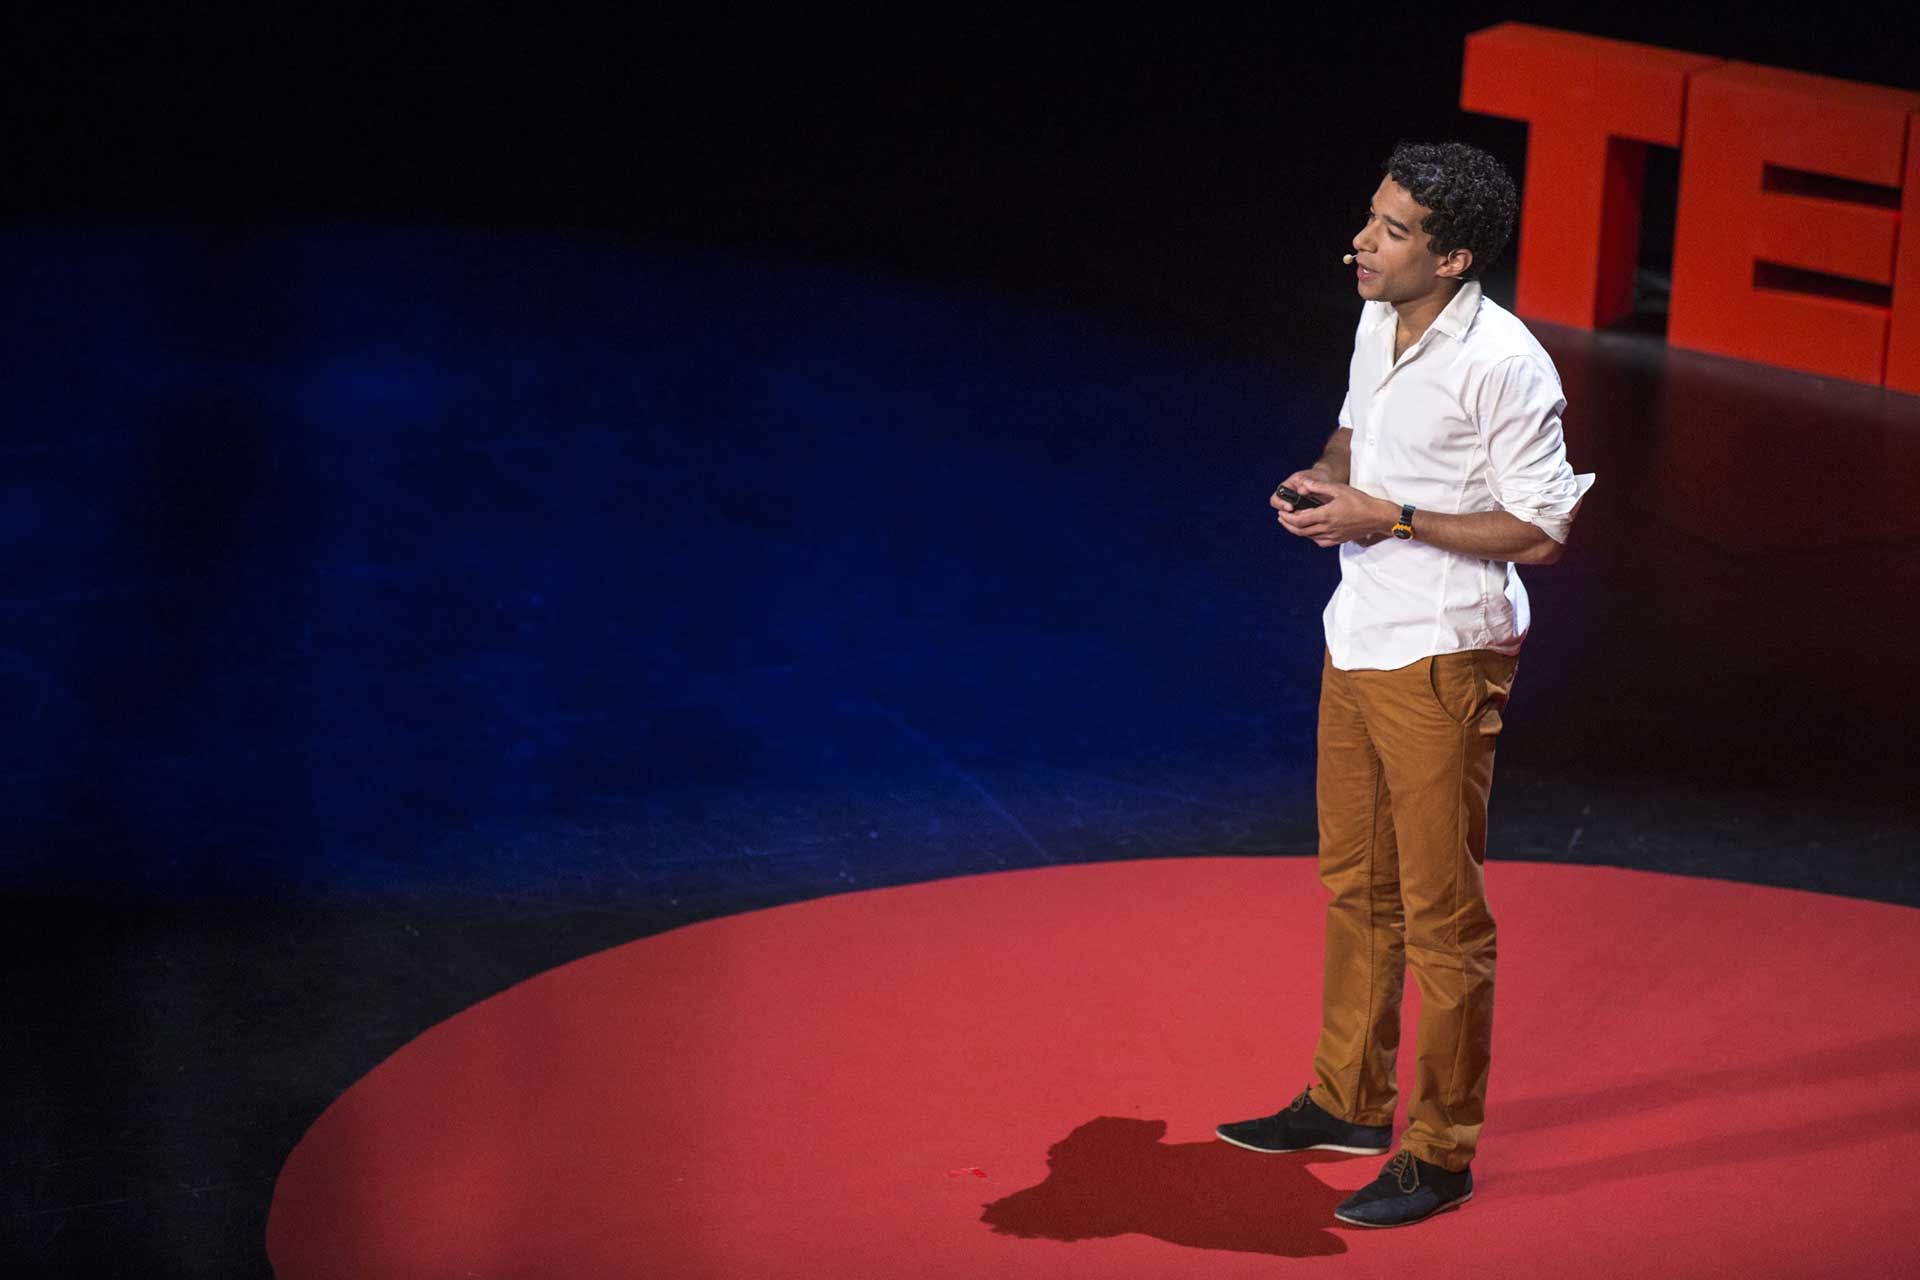 conference-TEDxParis-2014-17.jpg